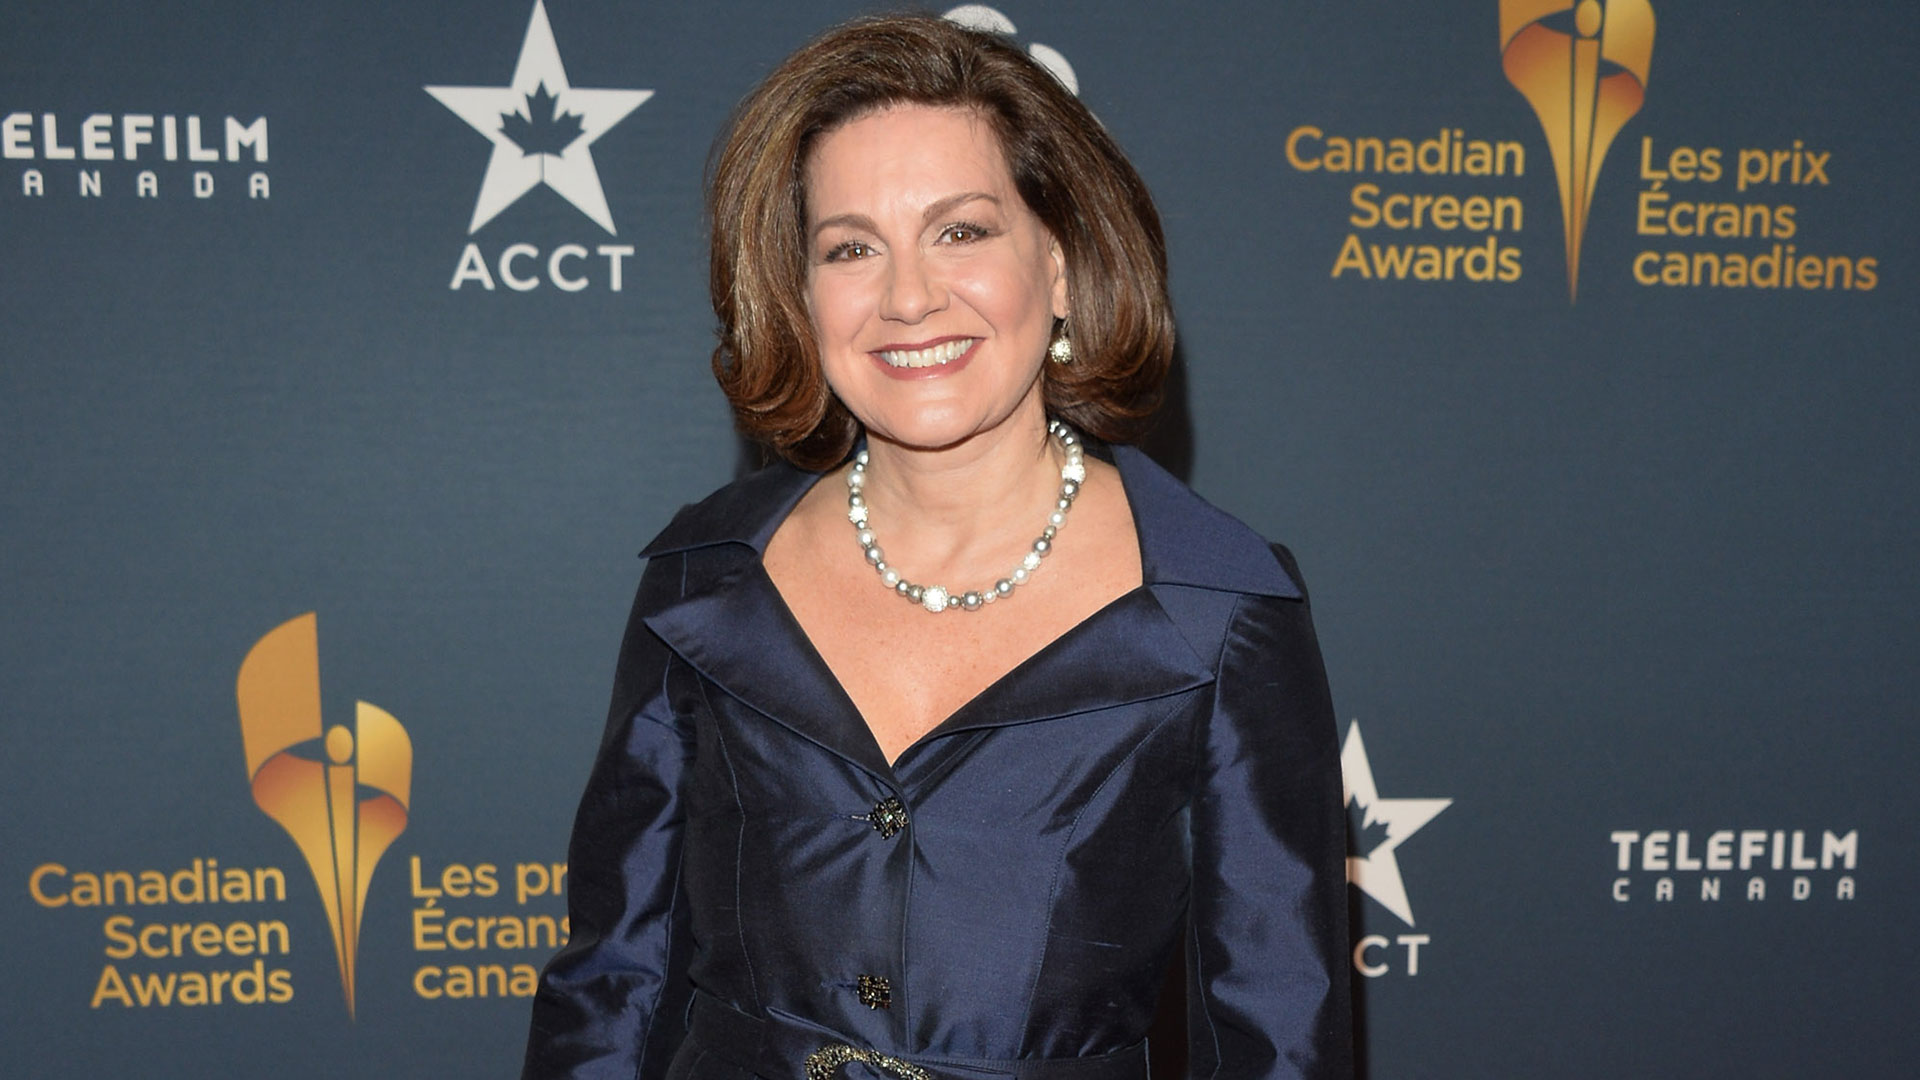 Lisa LaFlamme (Gettyimages)